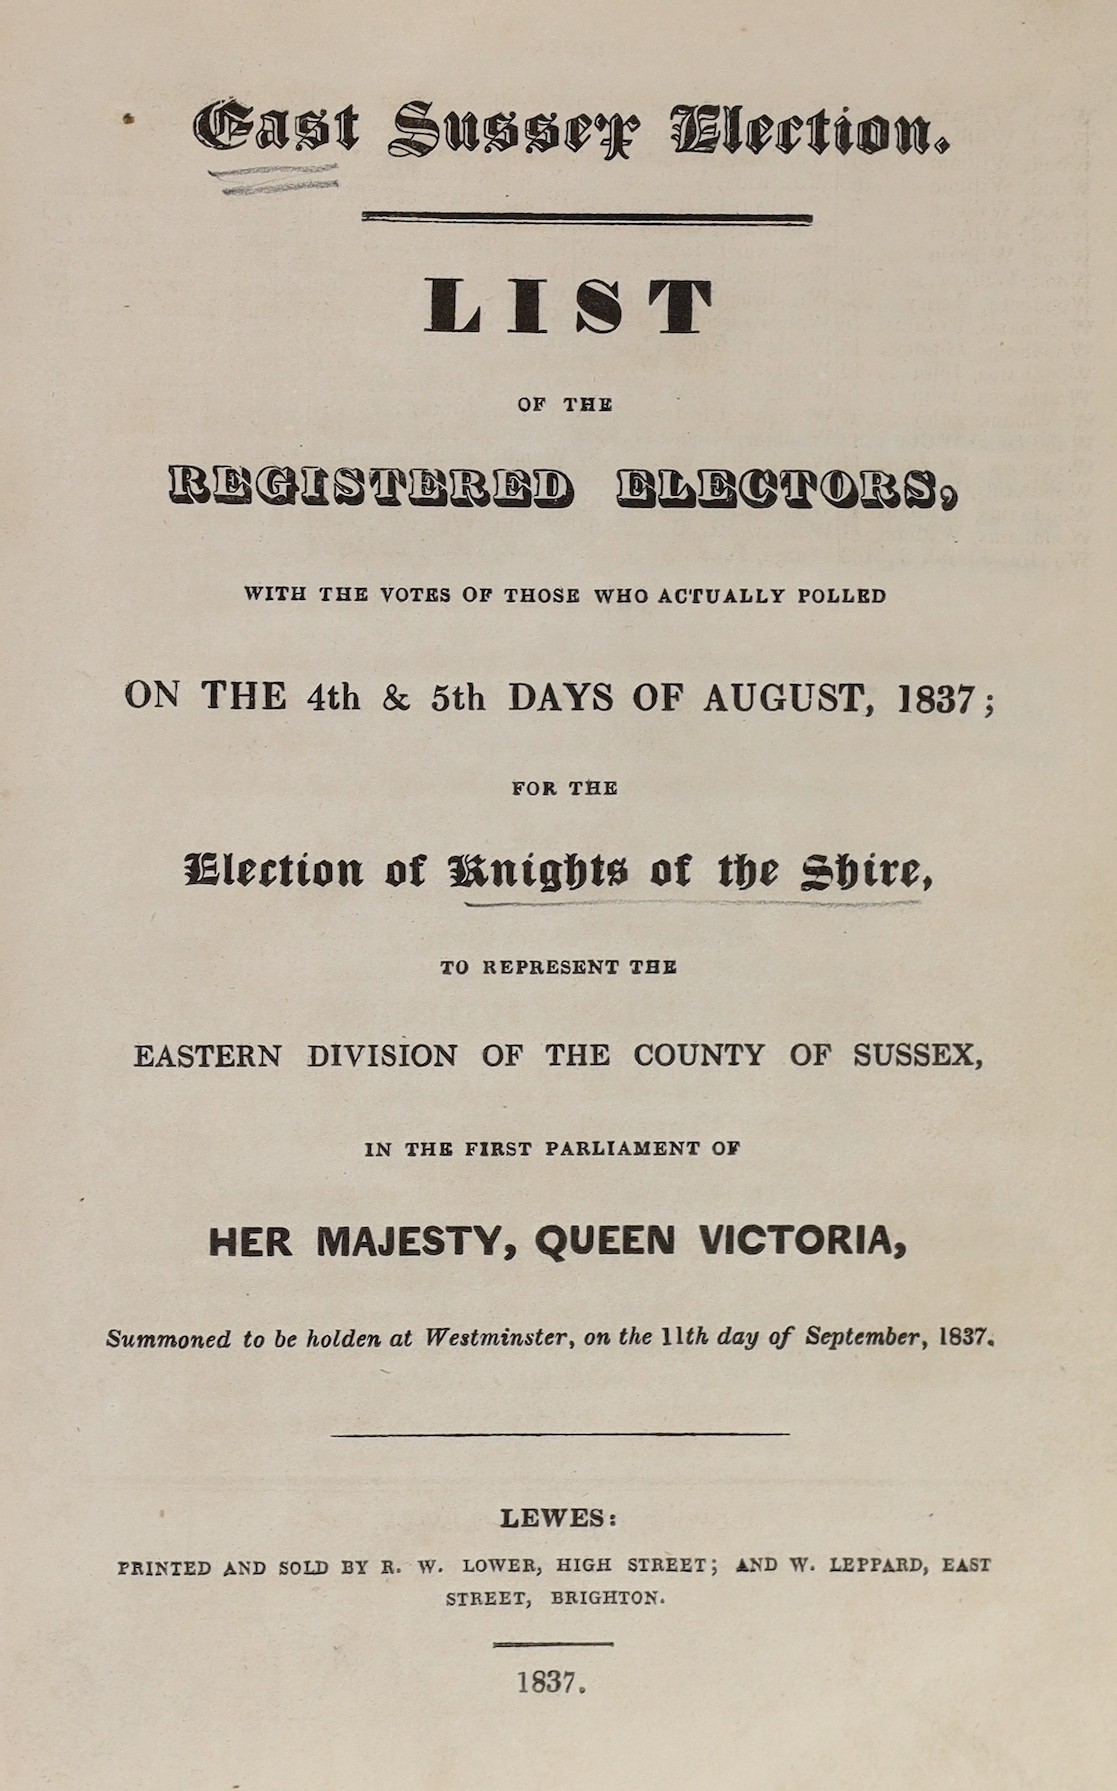 SUSSEX: (Poll Book) - East Sussex Election. List of the Registered Electors ... on the 4th and 5th days of August, 1837; for the Election of Knights of the Shire ...; contemp. half calf and marbled board. Lewes: printed